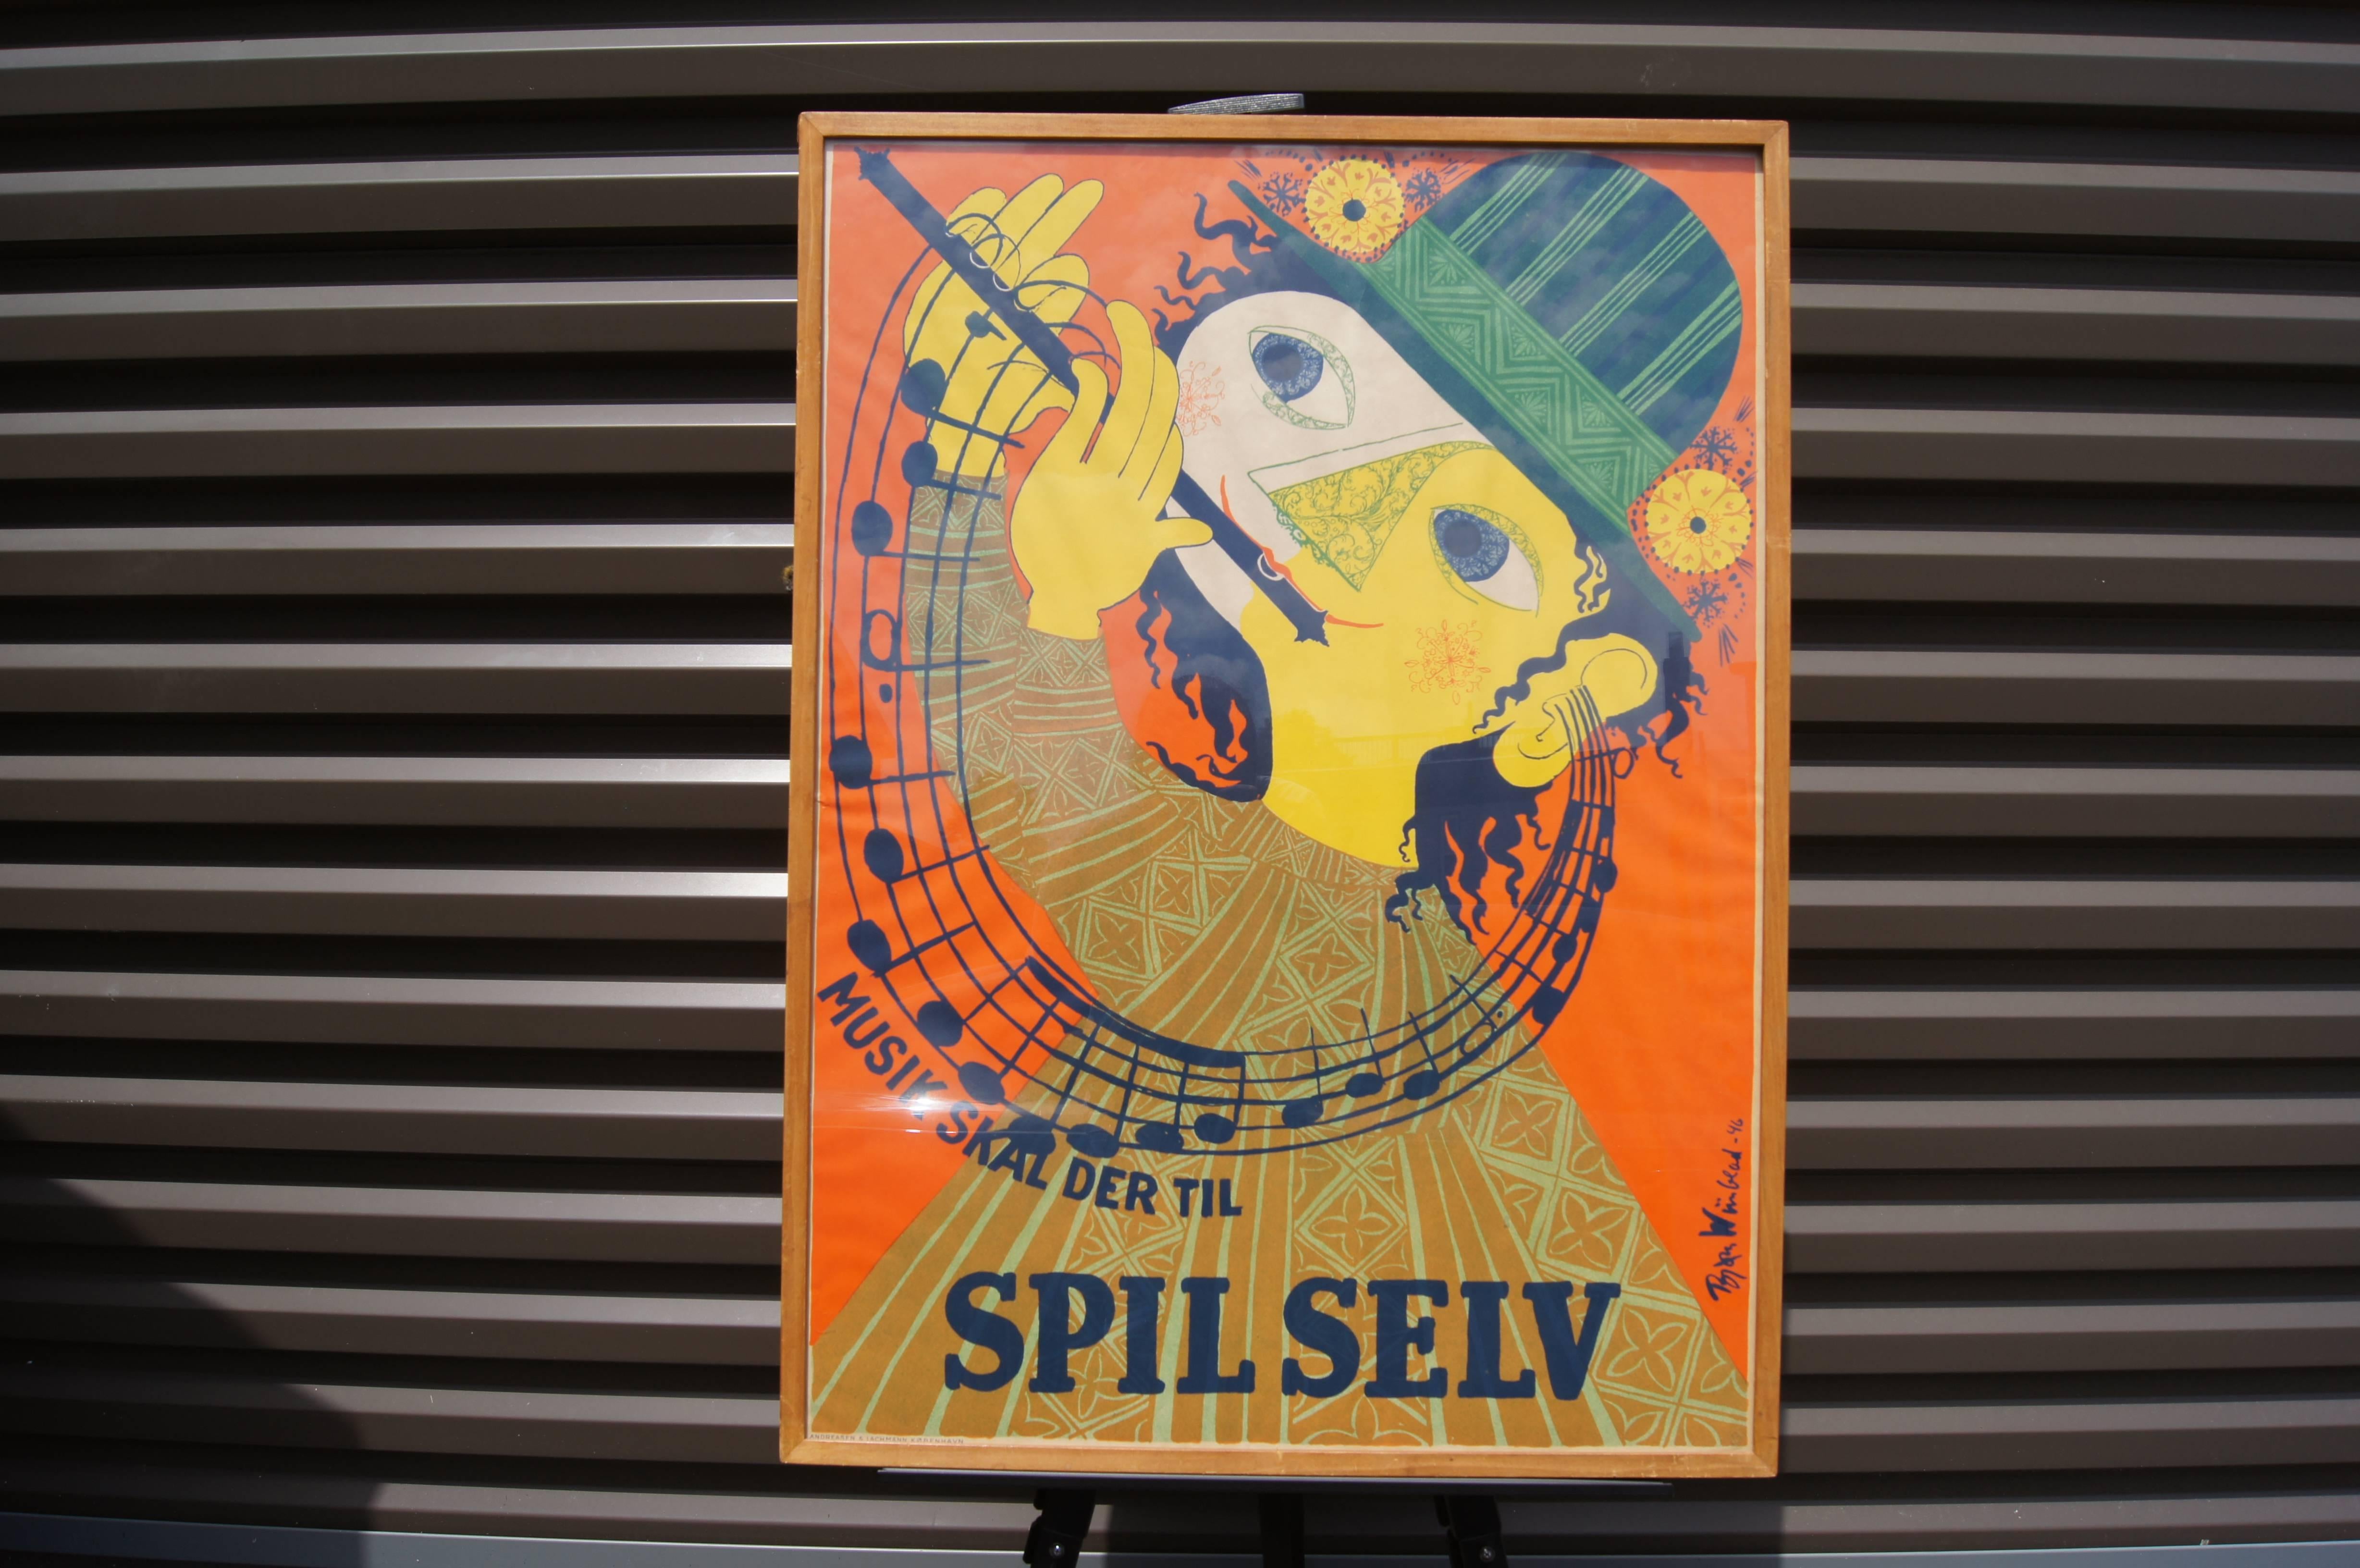 This vivid silkscreen poster, designed by Bjørn Wiinblad in 1946, celebrates the Danish Spil Selv Music Festival. The poster was produced by the well-known Danish printers Permild & Rosengreen.